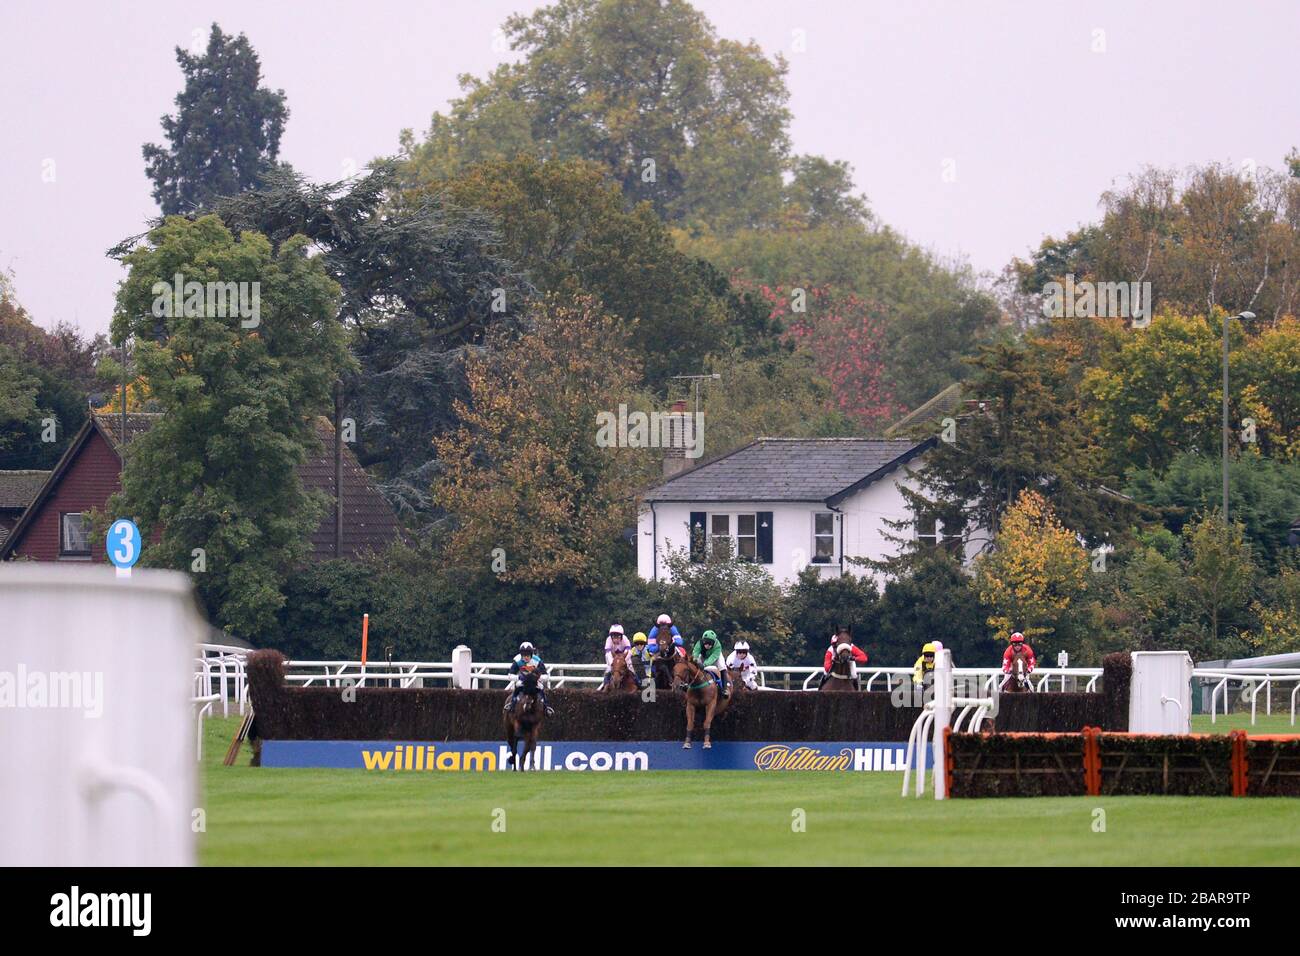 Horses jump the fence sponsored by William Hill during the williamhill.com Beginners' Chase Stock Photo